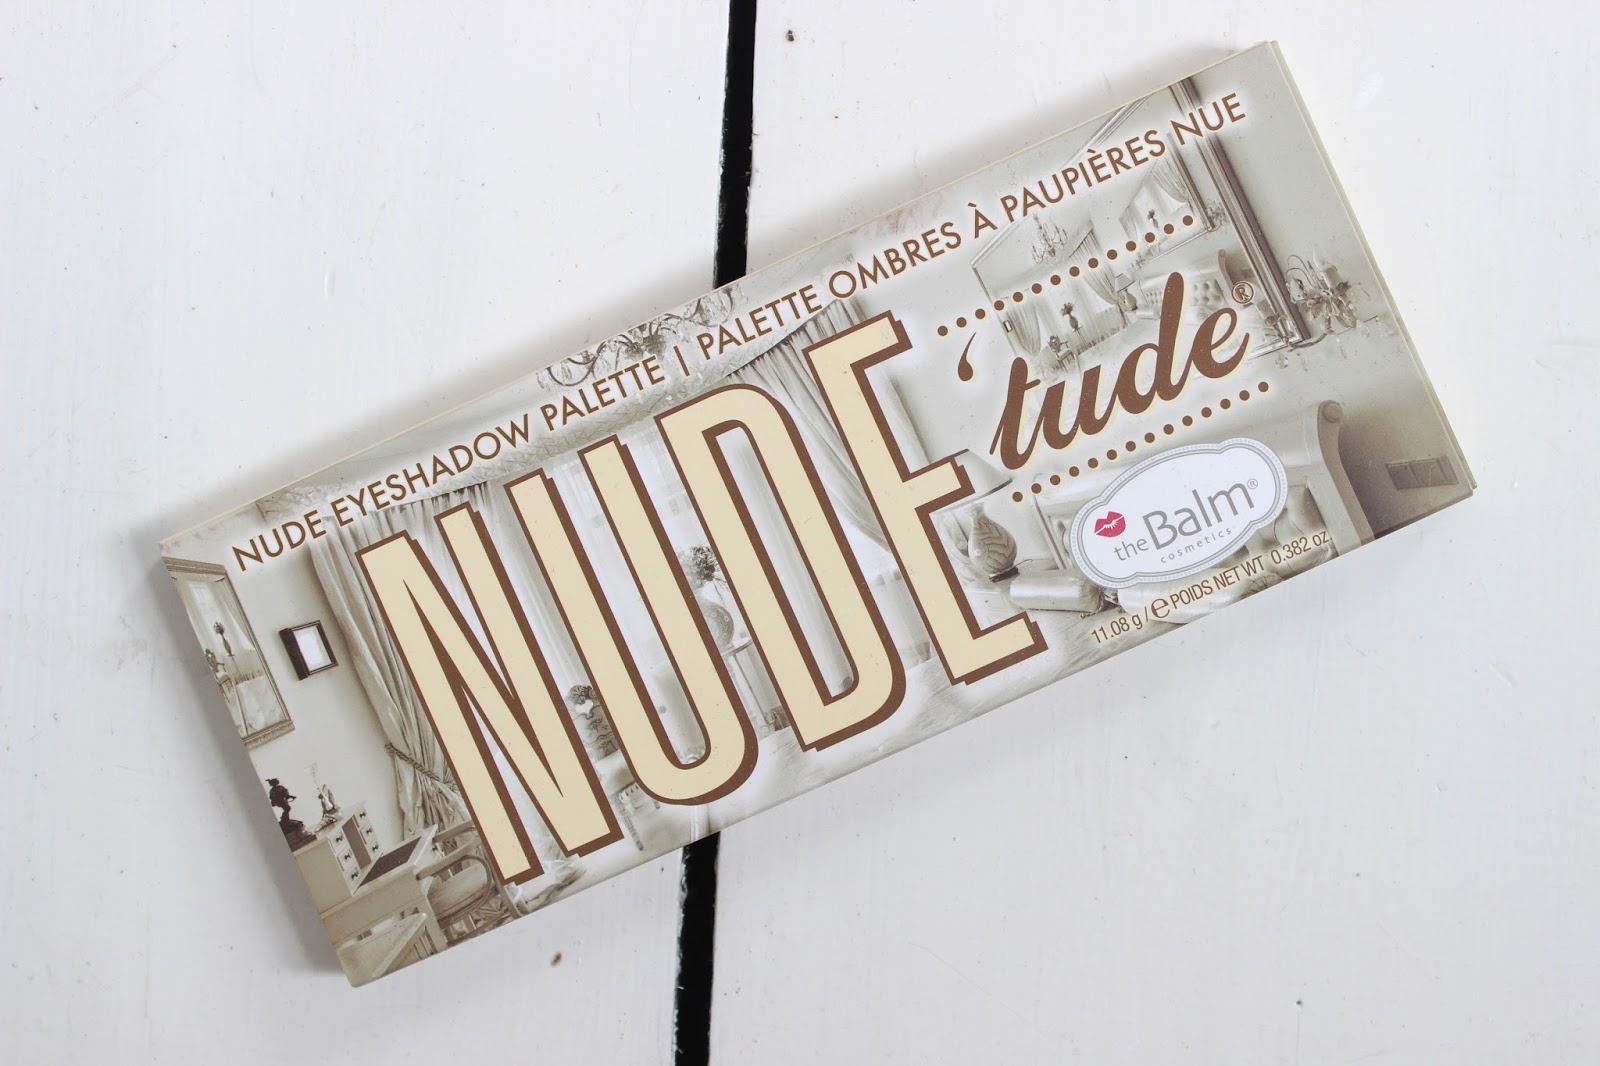 [Review] The Balm Nude tude Palette - Lucys Blog